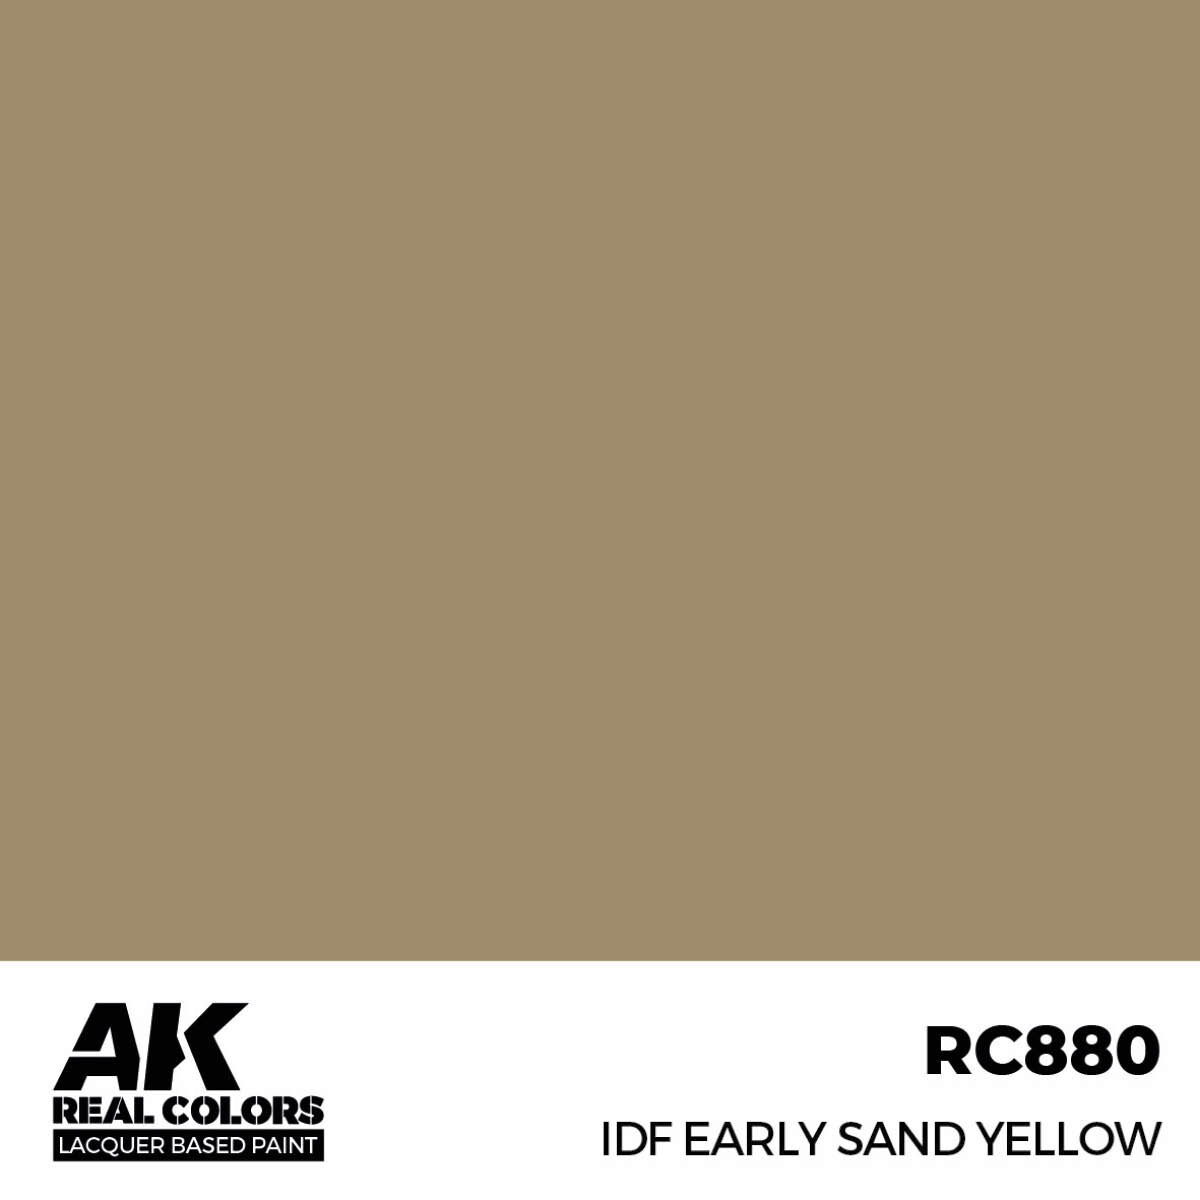 AK RC880 Real Colors IDF Early Sand Yellow 17 ml.